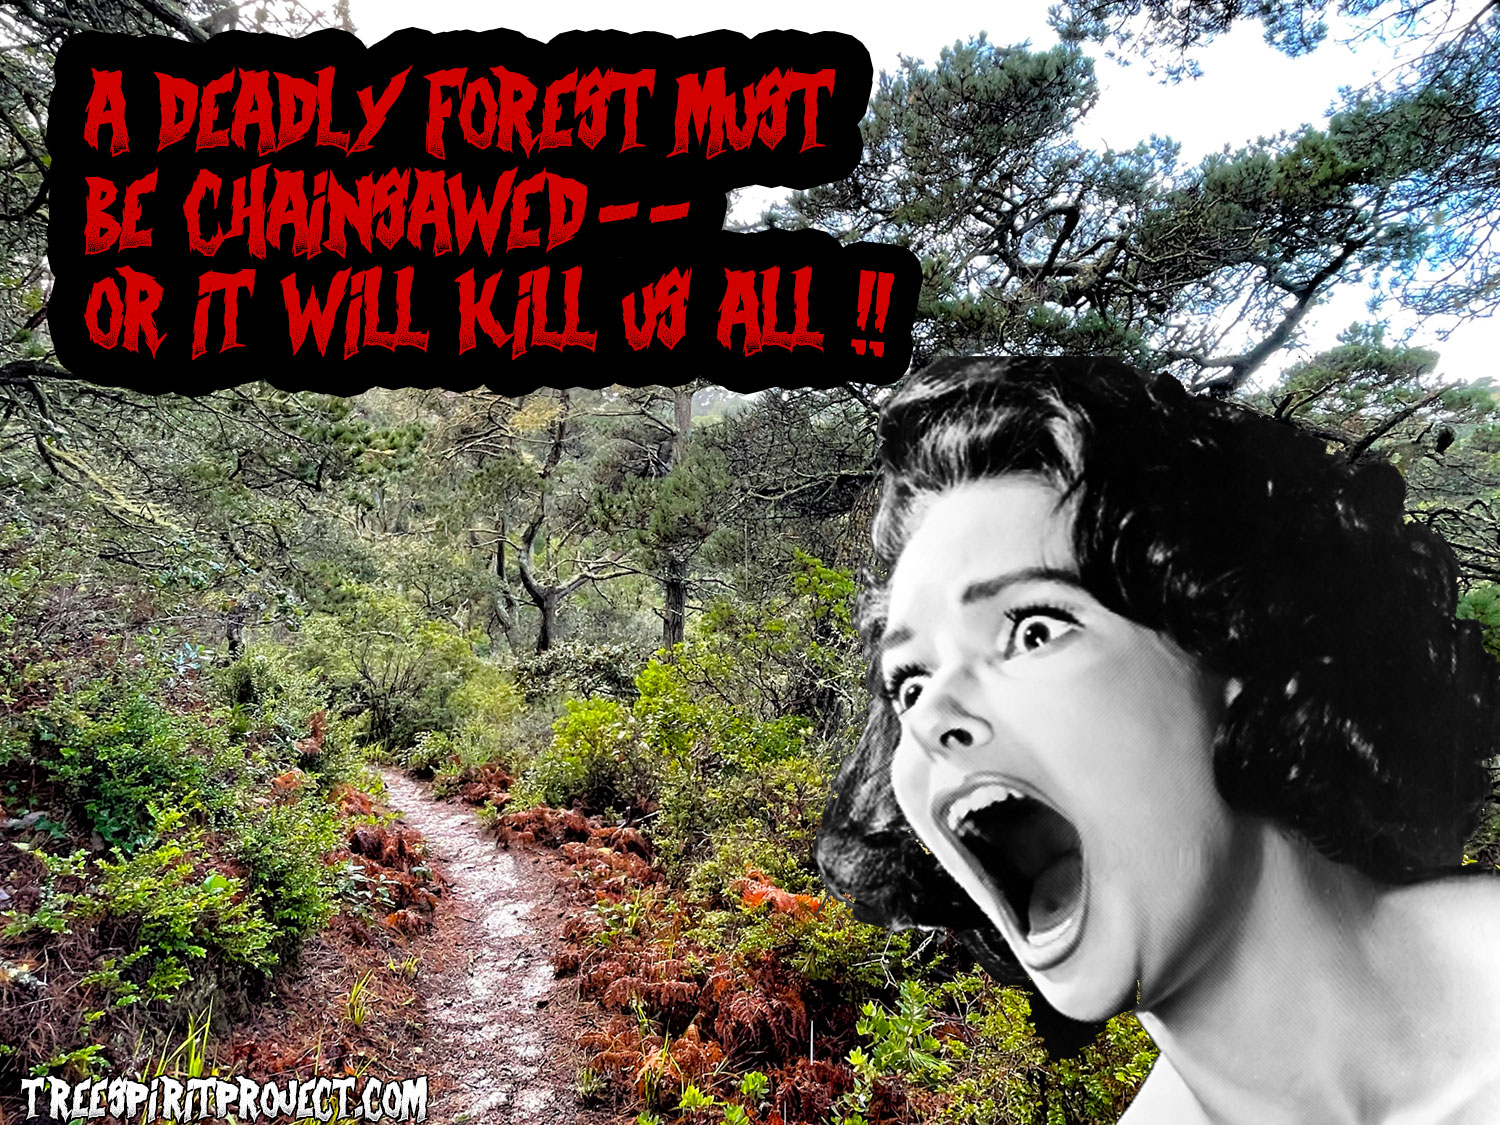 FEAR-of-FOREST-MUST-BE-CHAINSAWED-7691-v2.jpg